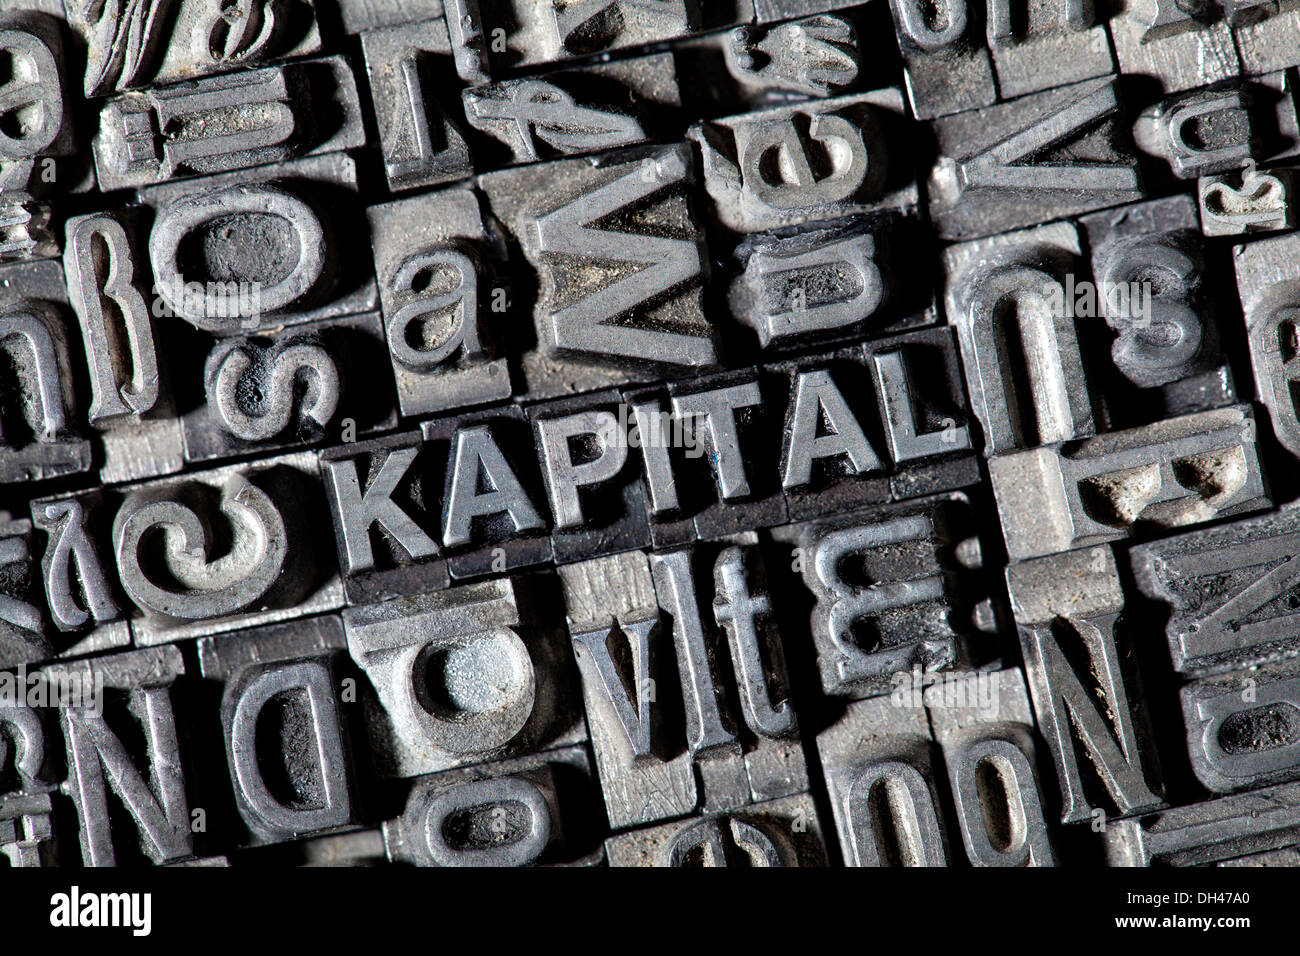 Old lead letters forming the word 'KAPITAL', German for 'capital' Stock Photo